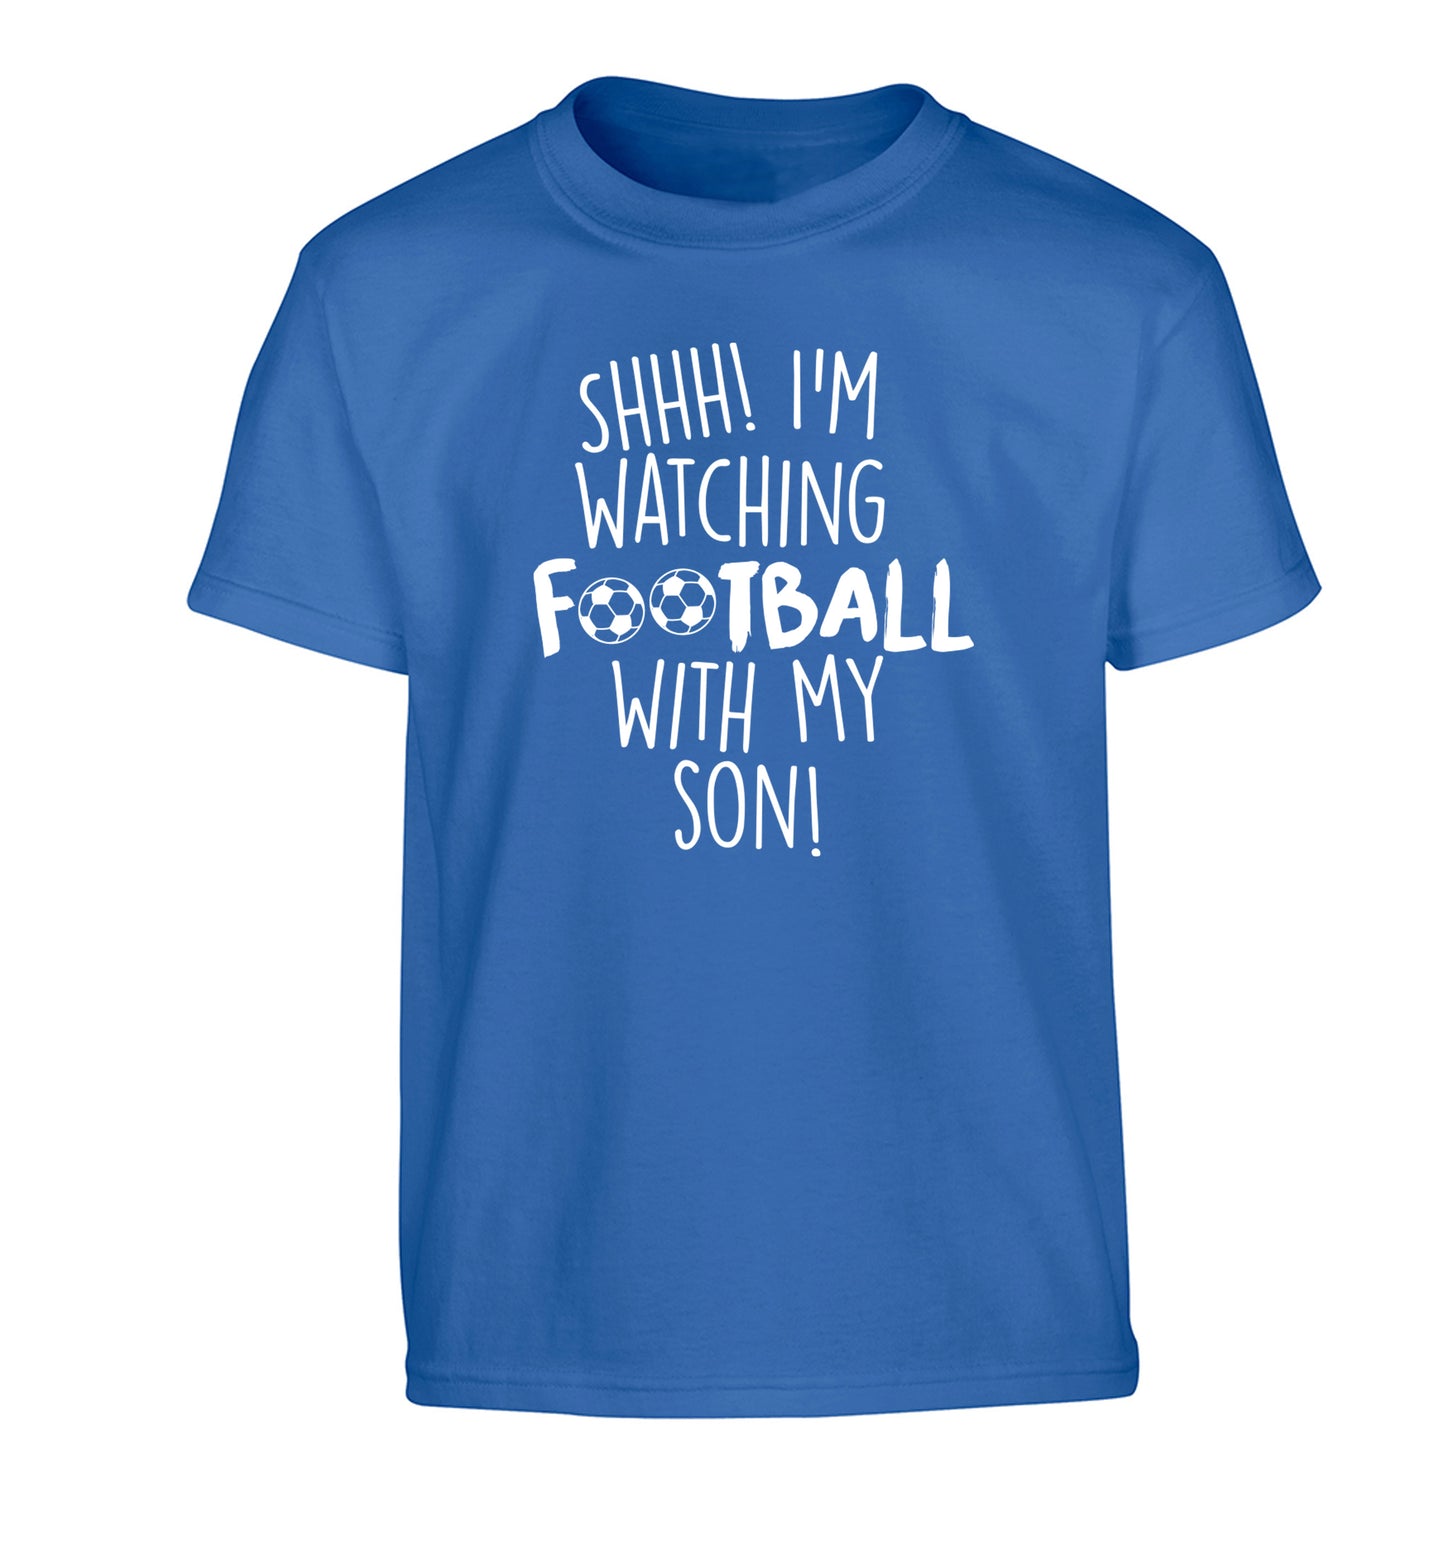 Shhh I'm watching football with my son Children's blue Tshirt 12-14 Years